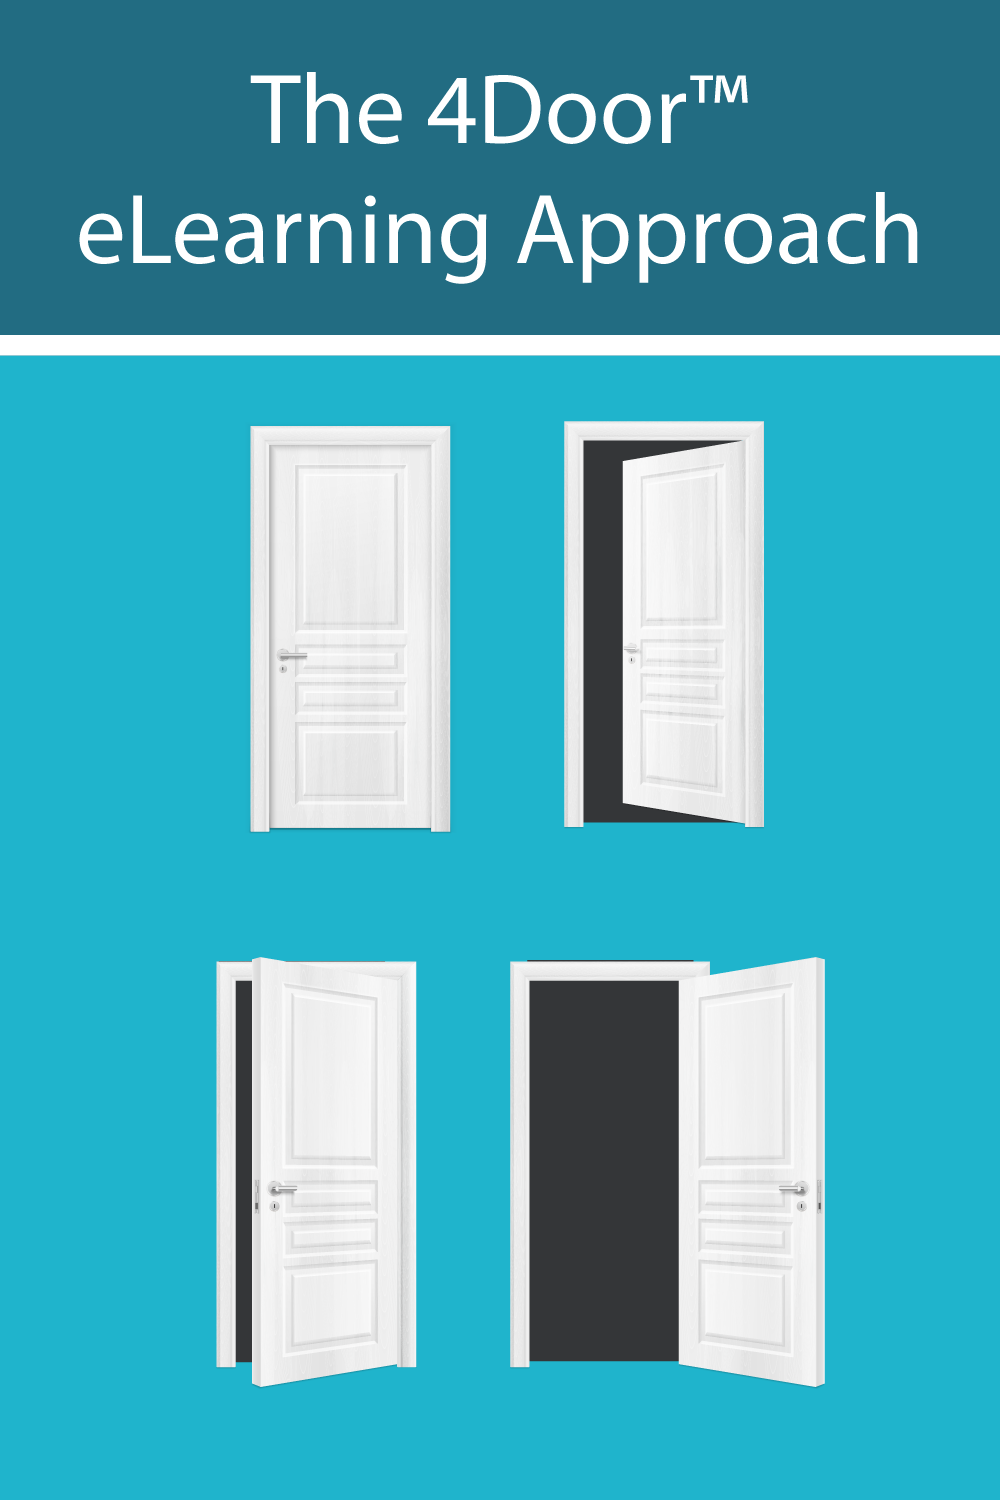 The 4Door™ eLearning Approach